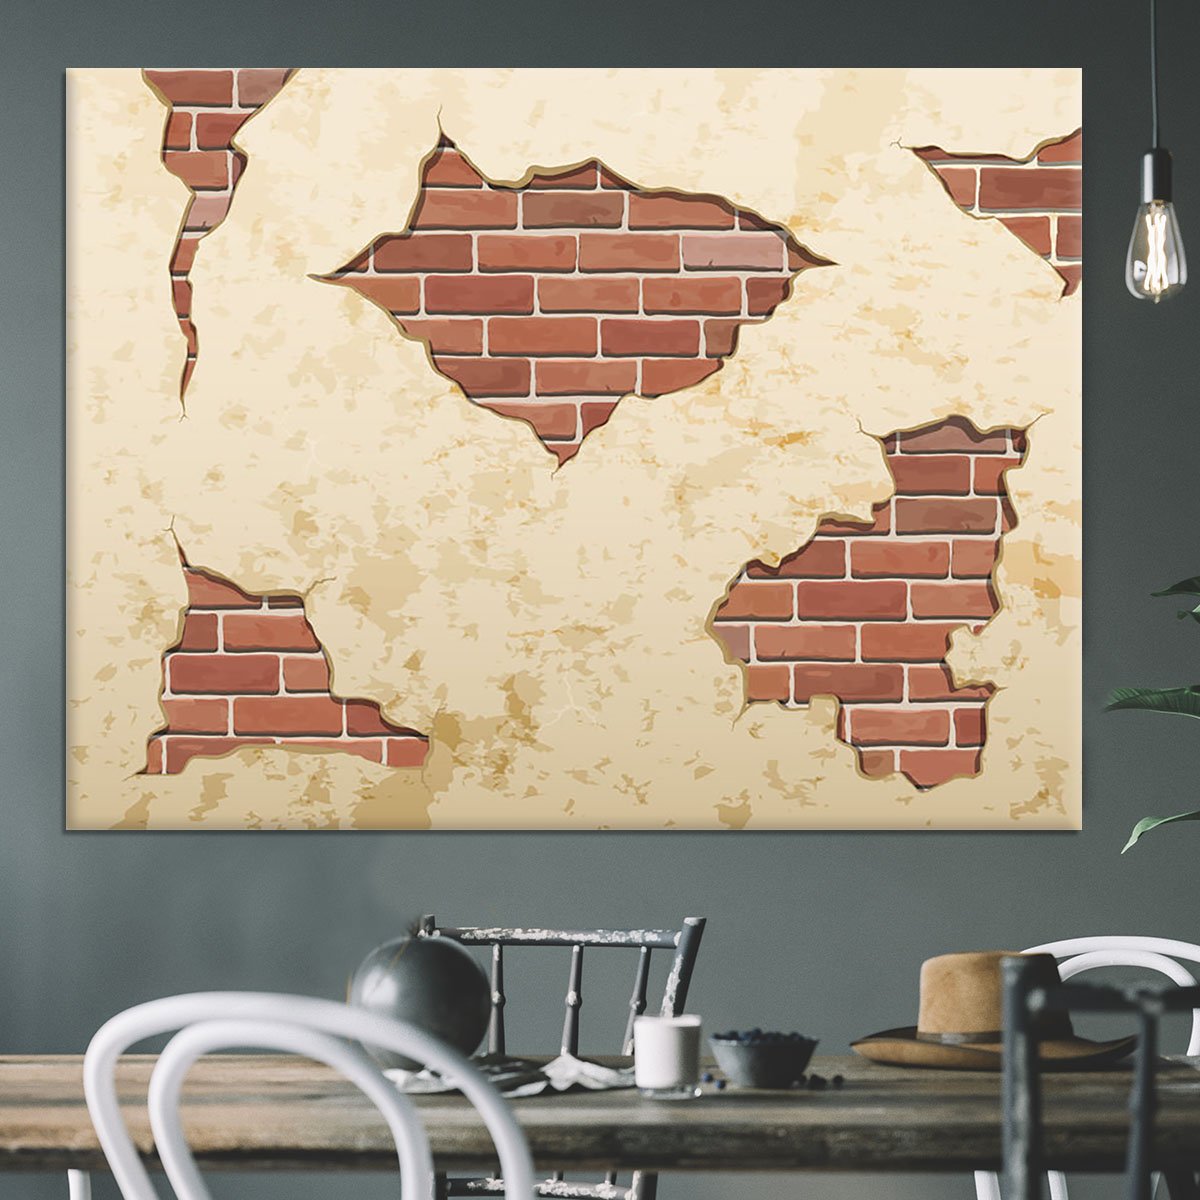 The old shabby concrete and brick cracks Canvas Print or Poster